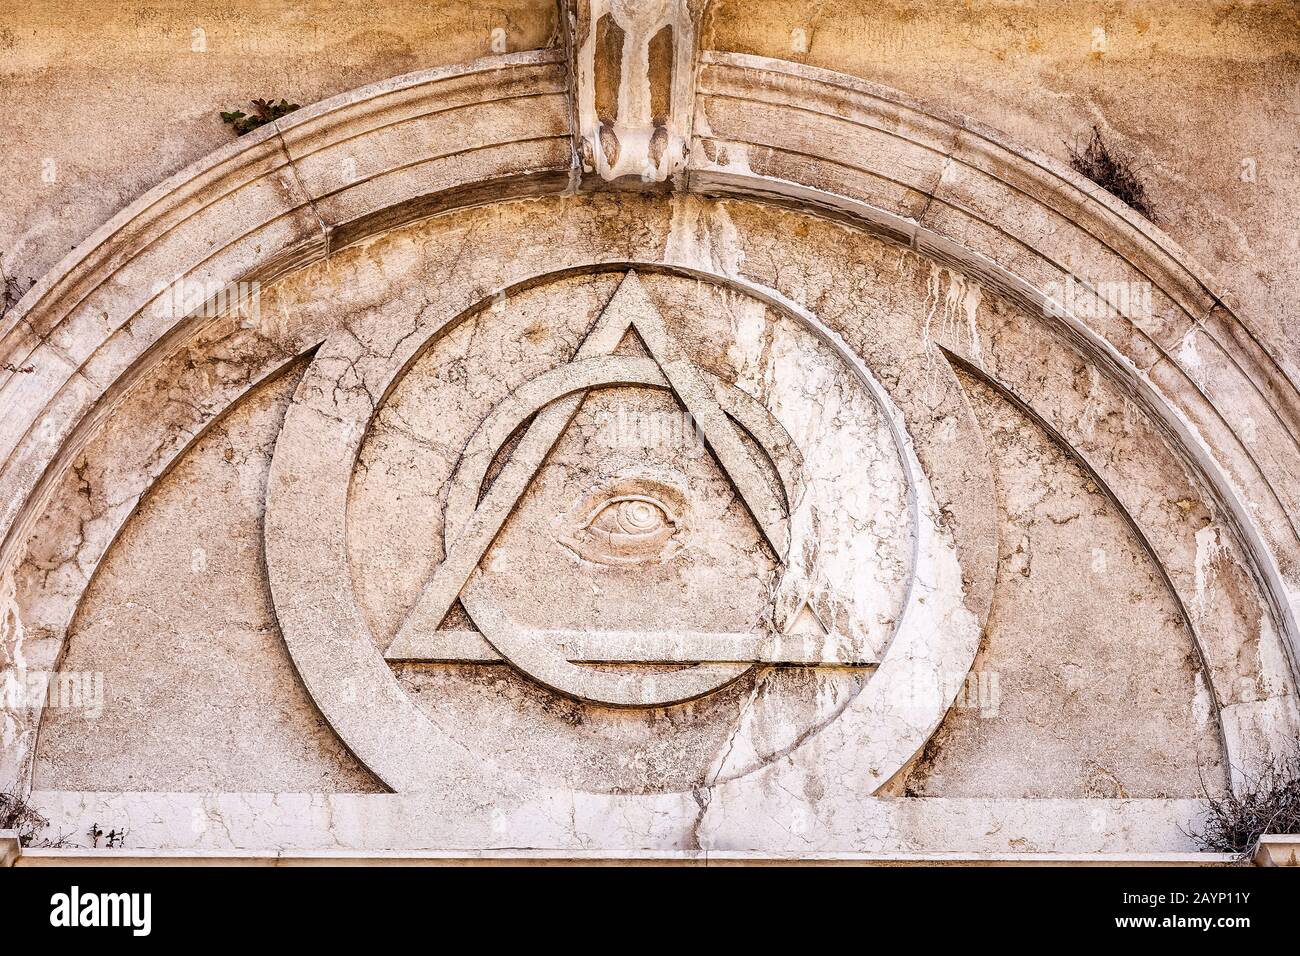 conspiracy-theory-concept-of-illuminati-triangle-and-all-seeing-eye-on-an-ancient-temple-2AYP11Y.jpg